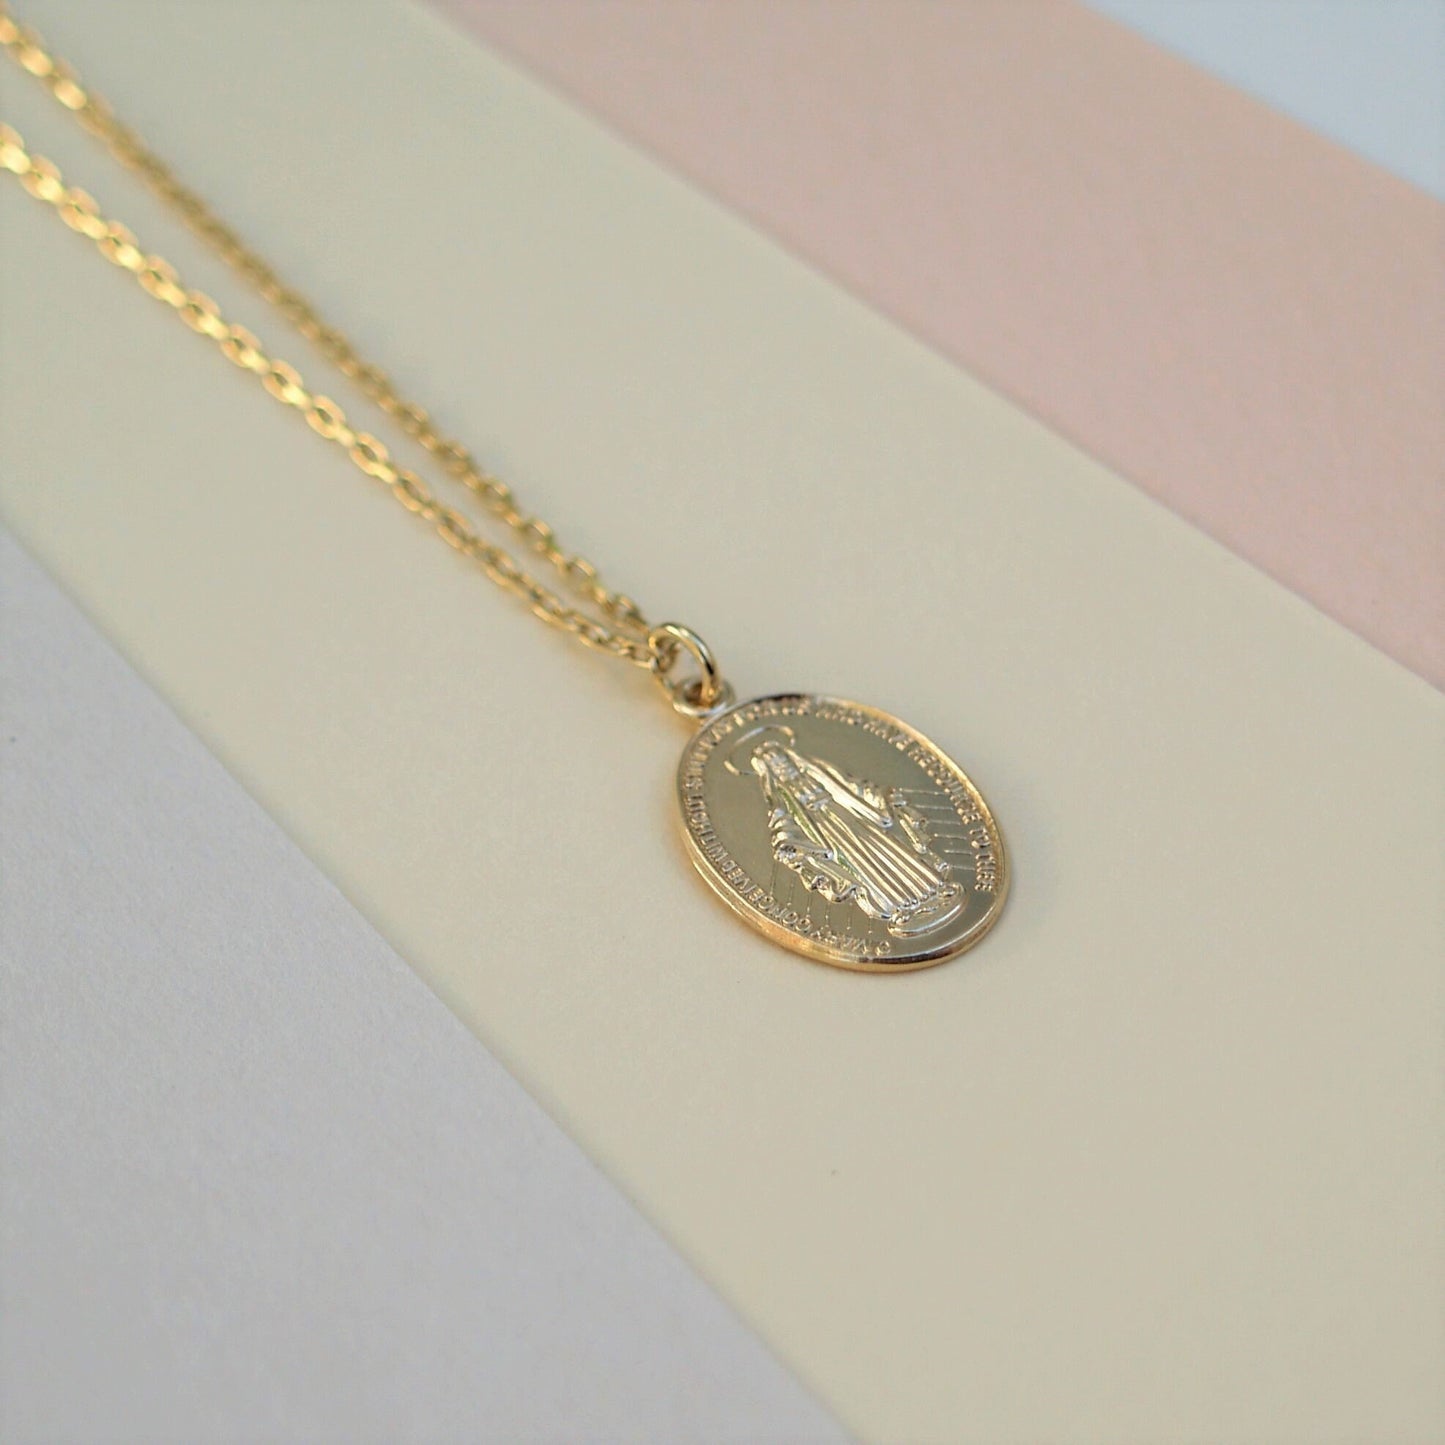 9ct solid yellow gold small size Miraculous Mary oval medal pendant on a 1.1mm wide diamond cut trace chain